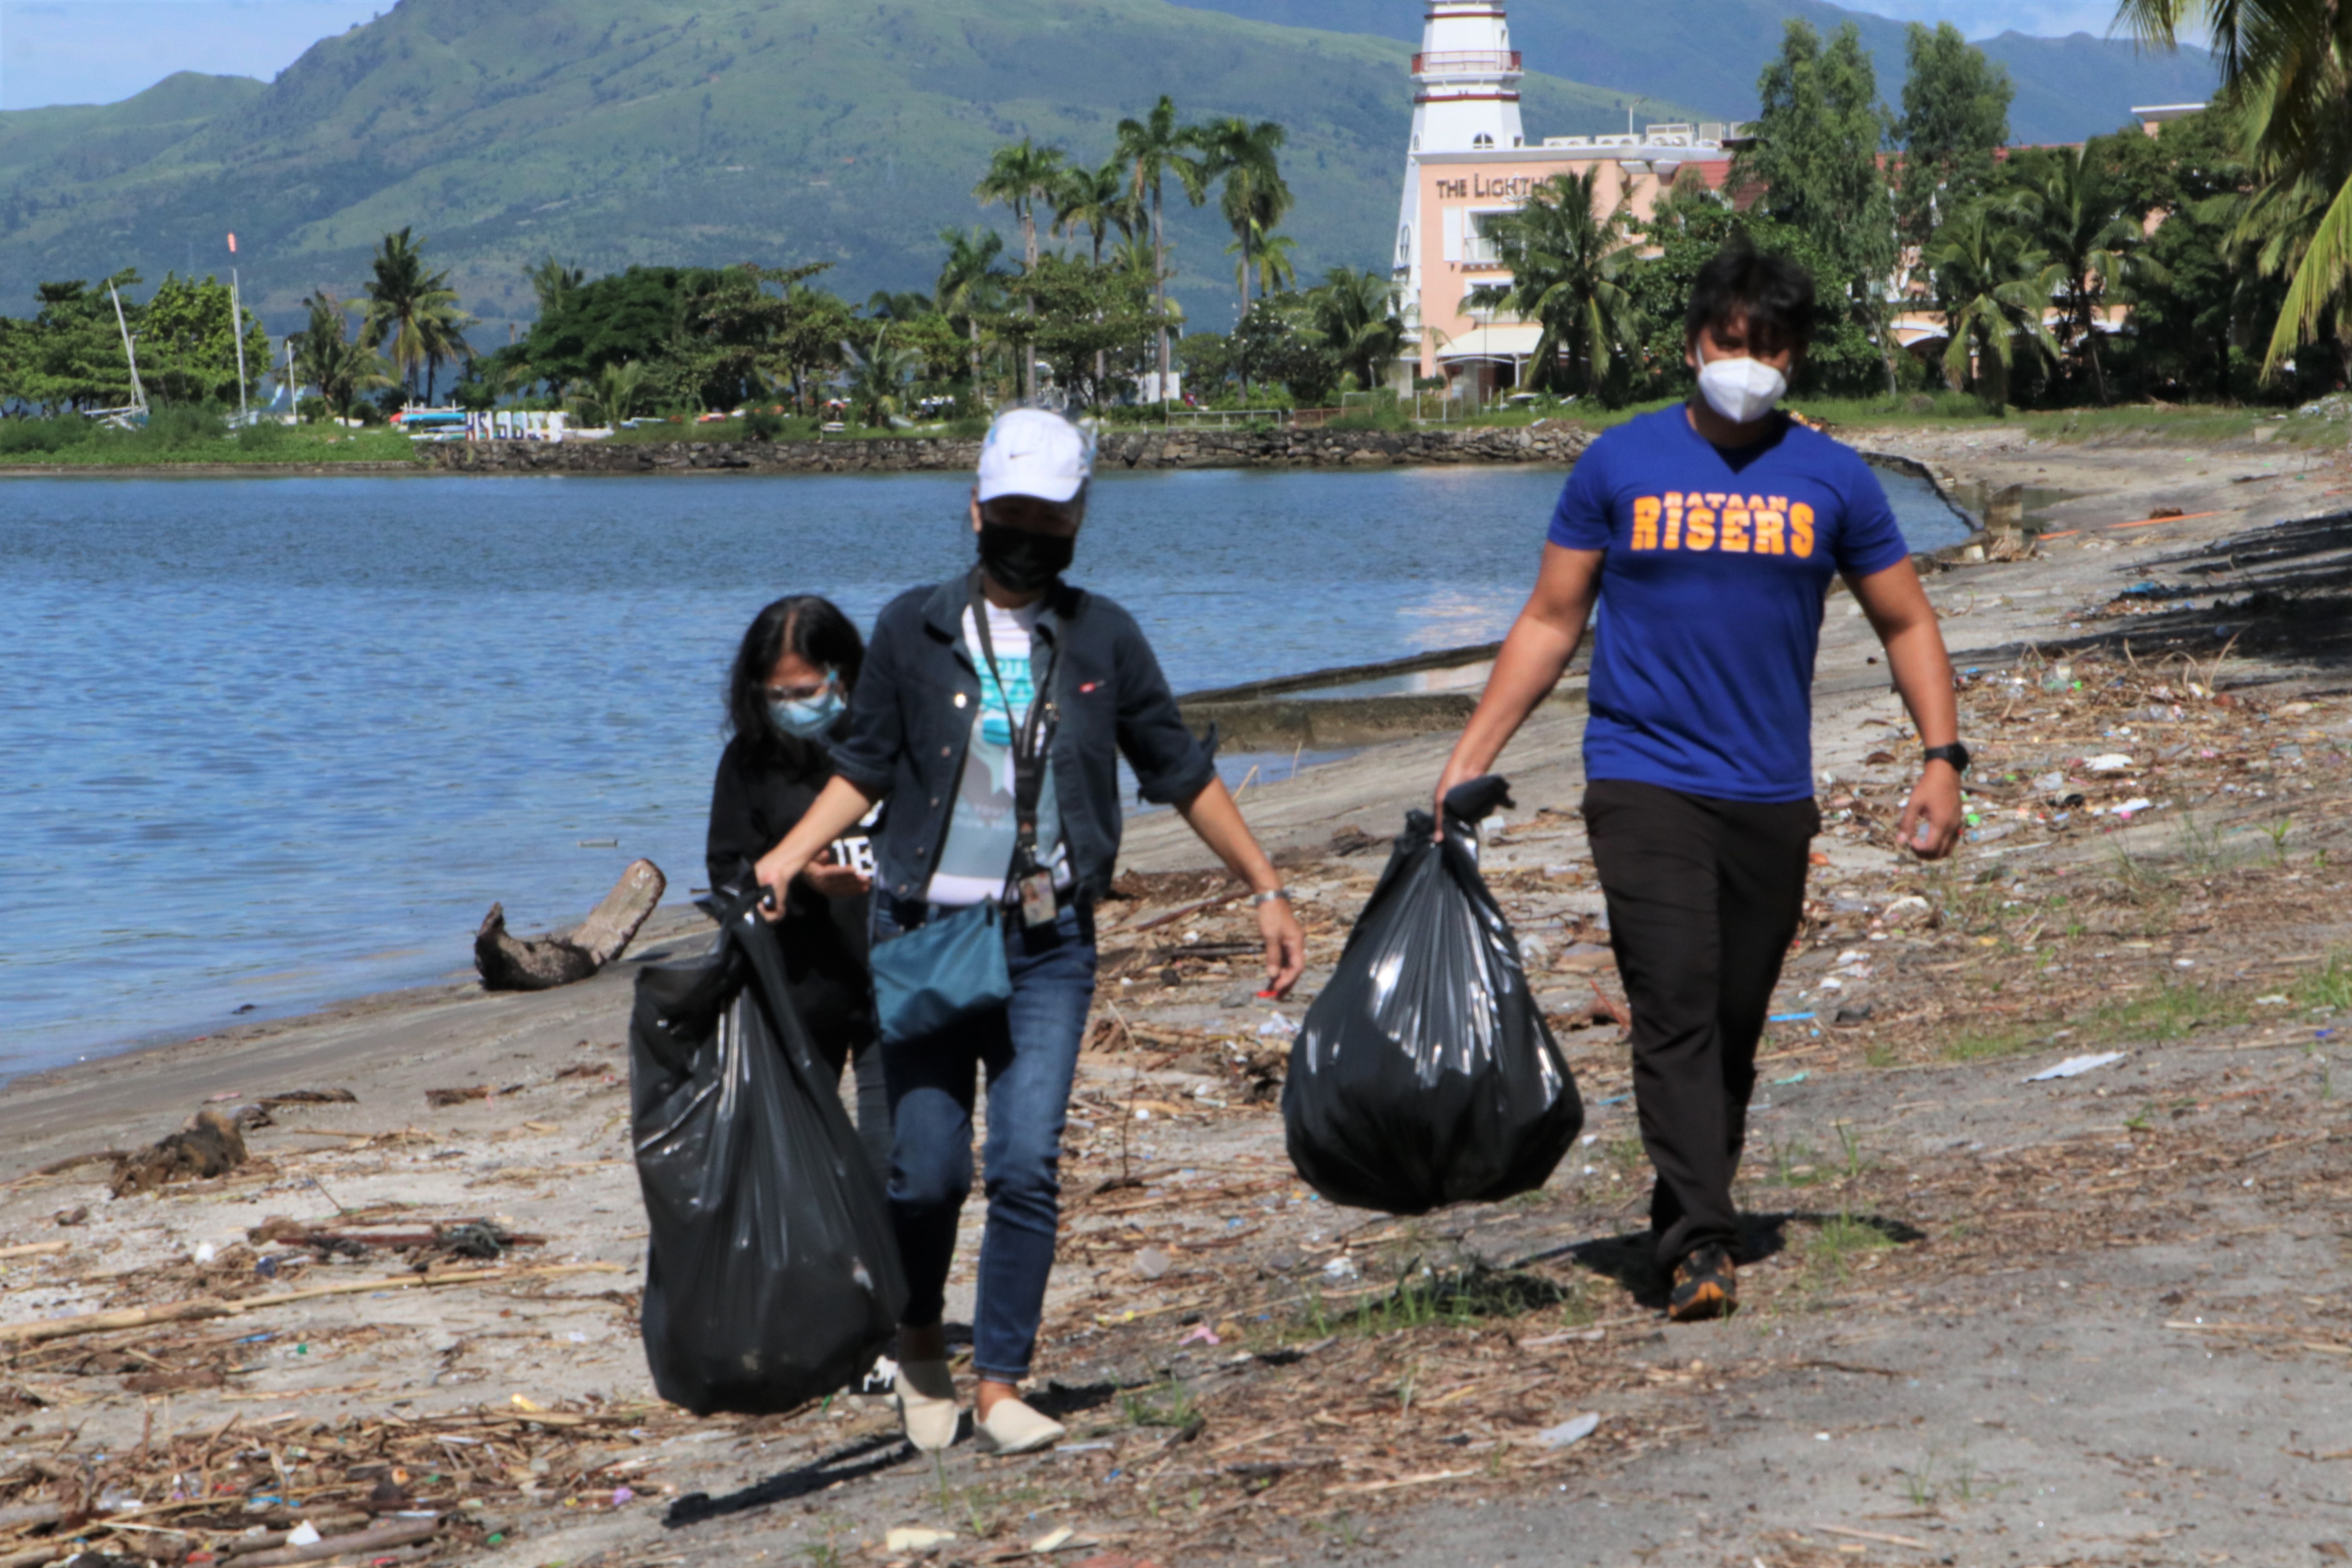 Participants in the 2021 coastal cleanup scour the shoreline in the Subic Bay Freeport to collect wastes and storm debris washed on shore.